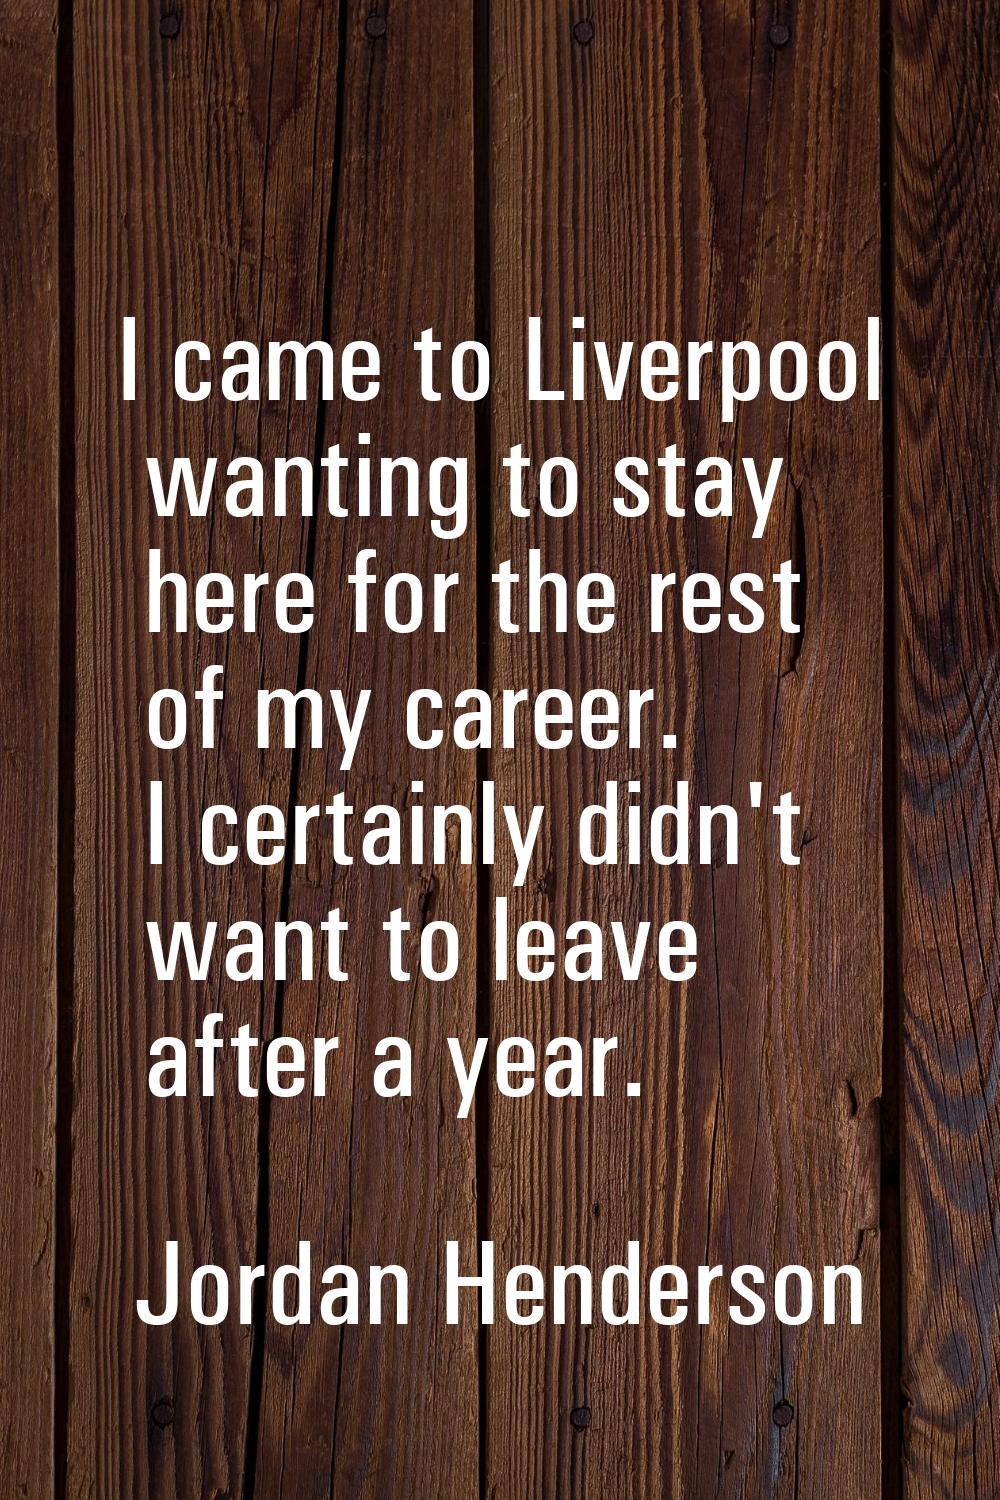 I came to Liverpool wanting to stay here for the rest of my career. I certainly didn't want to leav